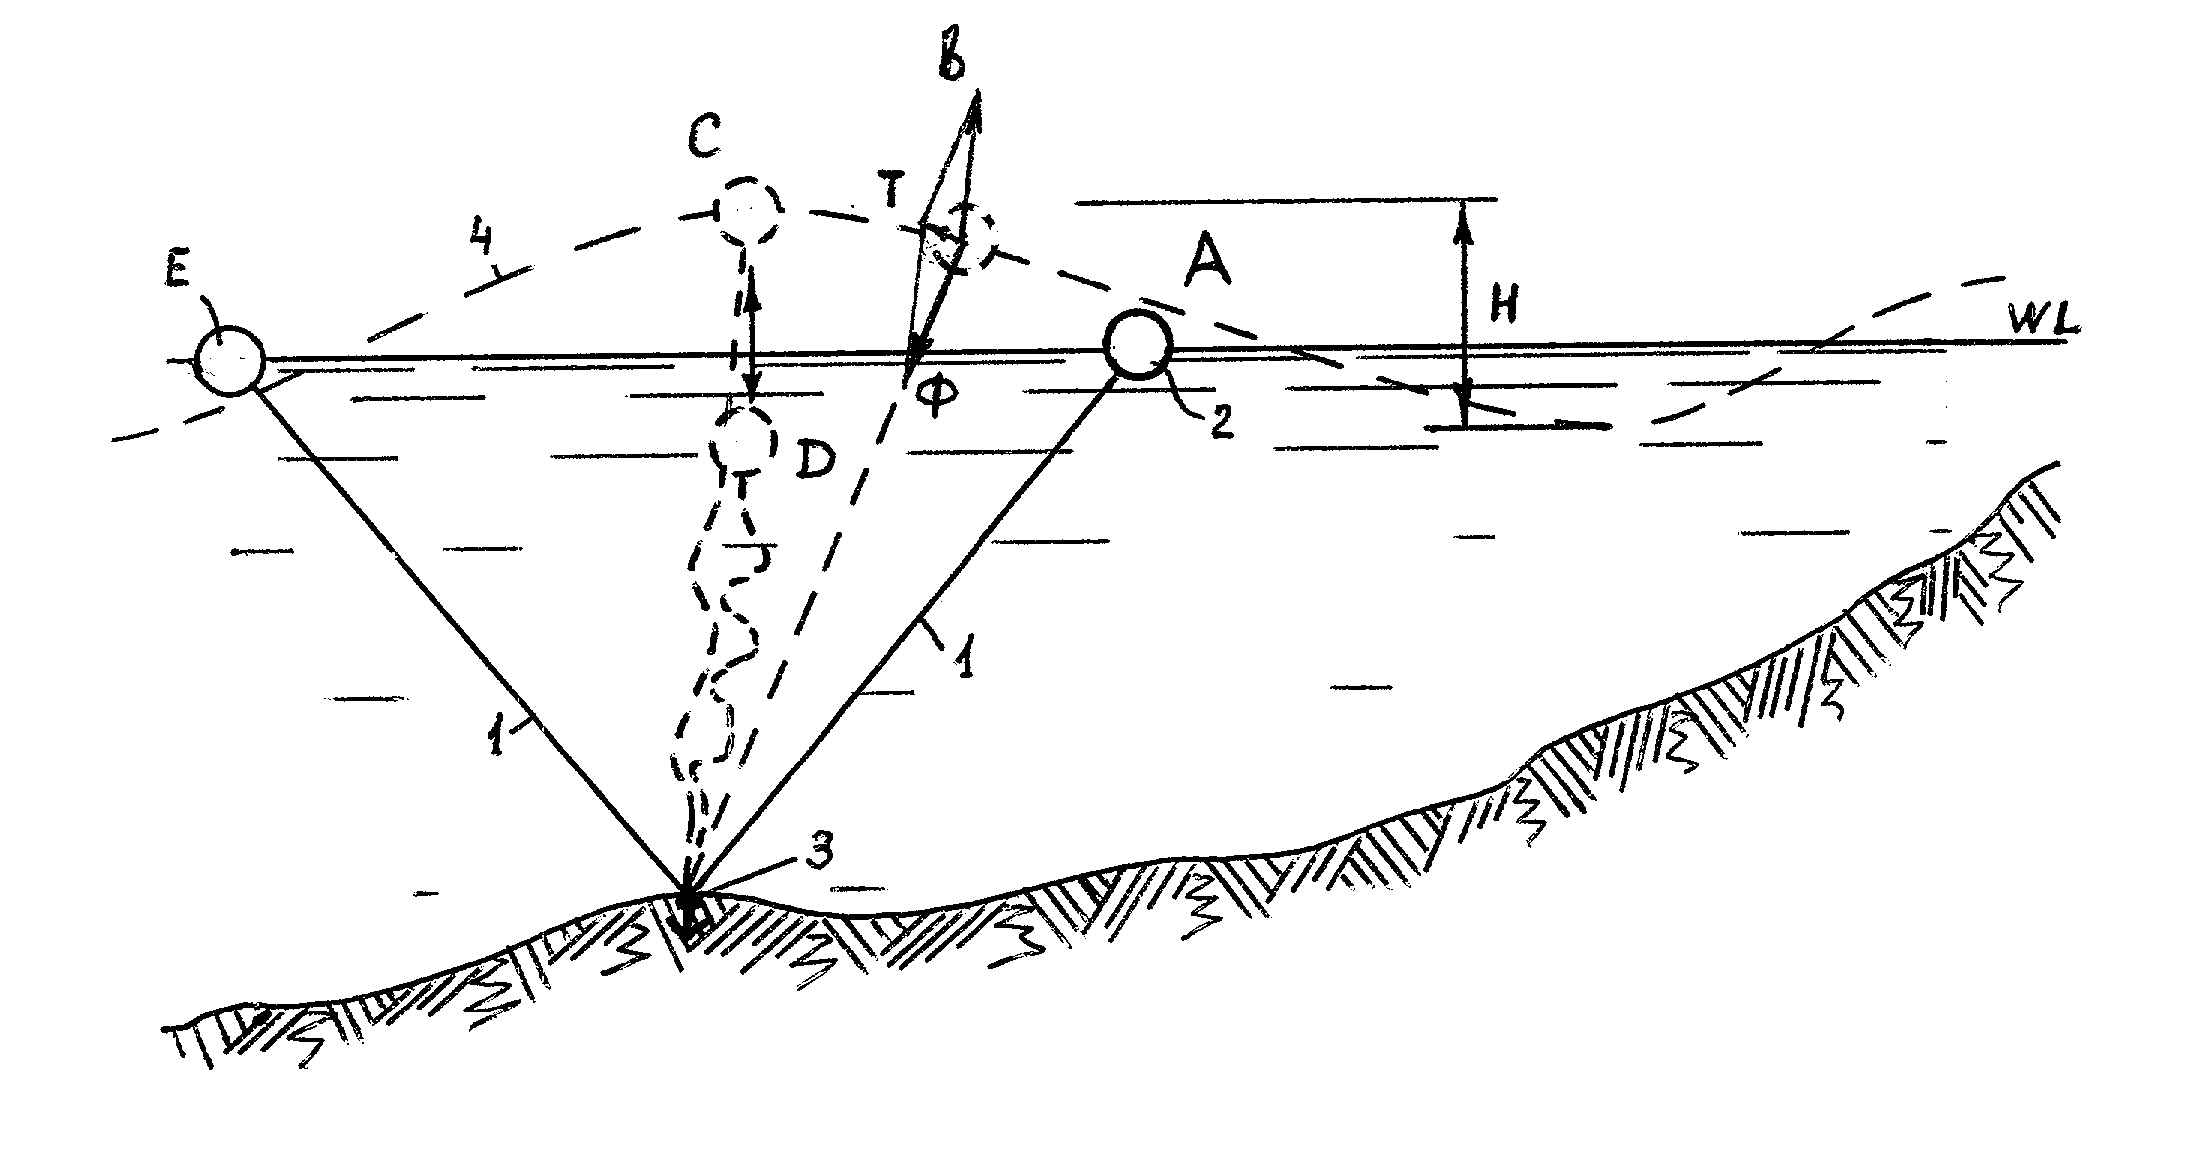 Wave powered cyclic anchoring itinerant ship propulsion system